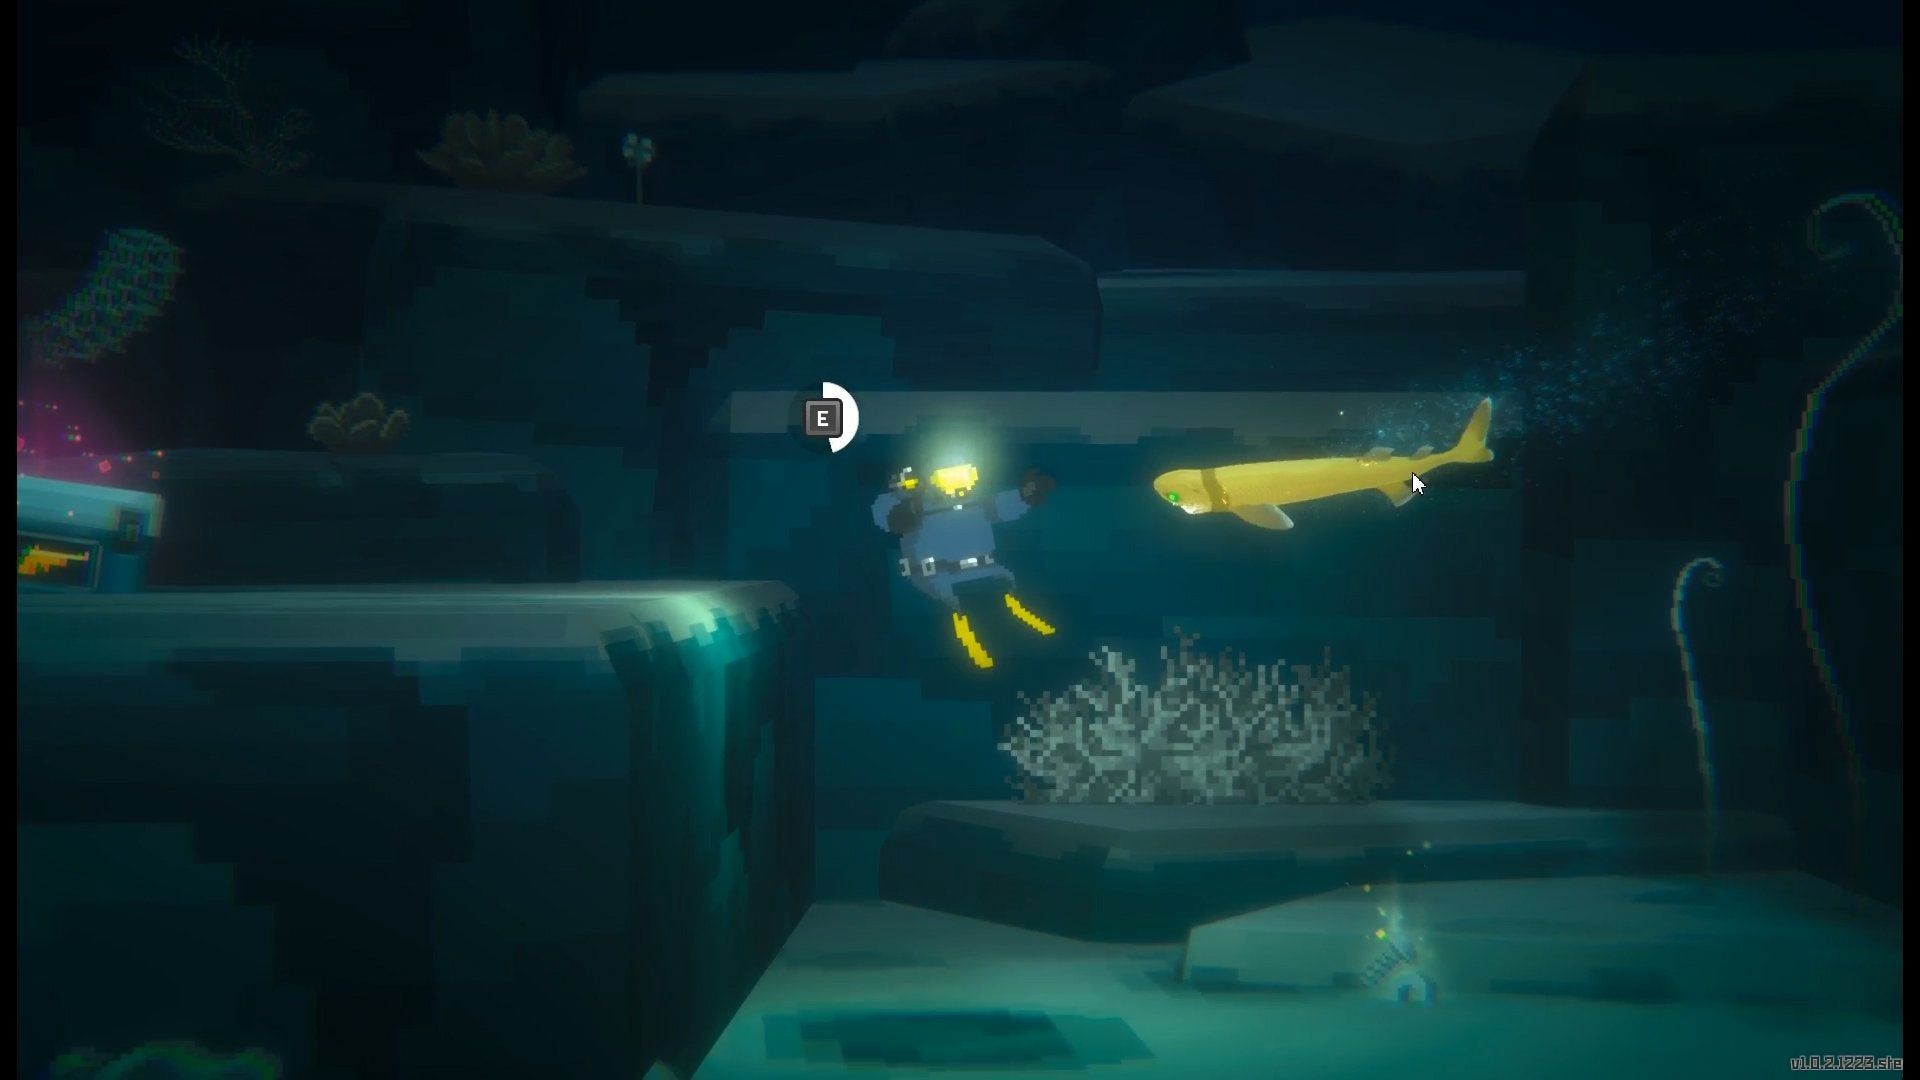 The player about to dodge an attack from a Cookiecutter Shark.